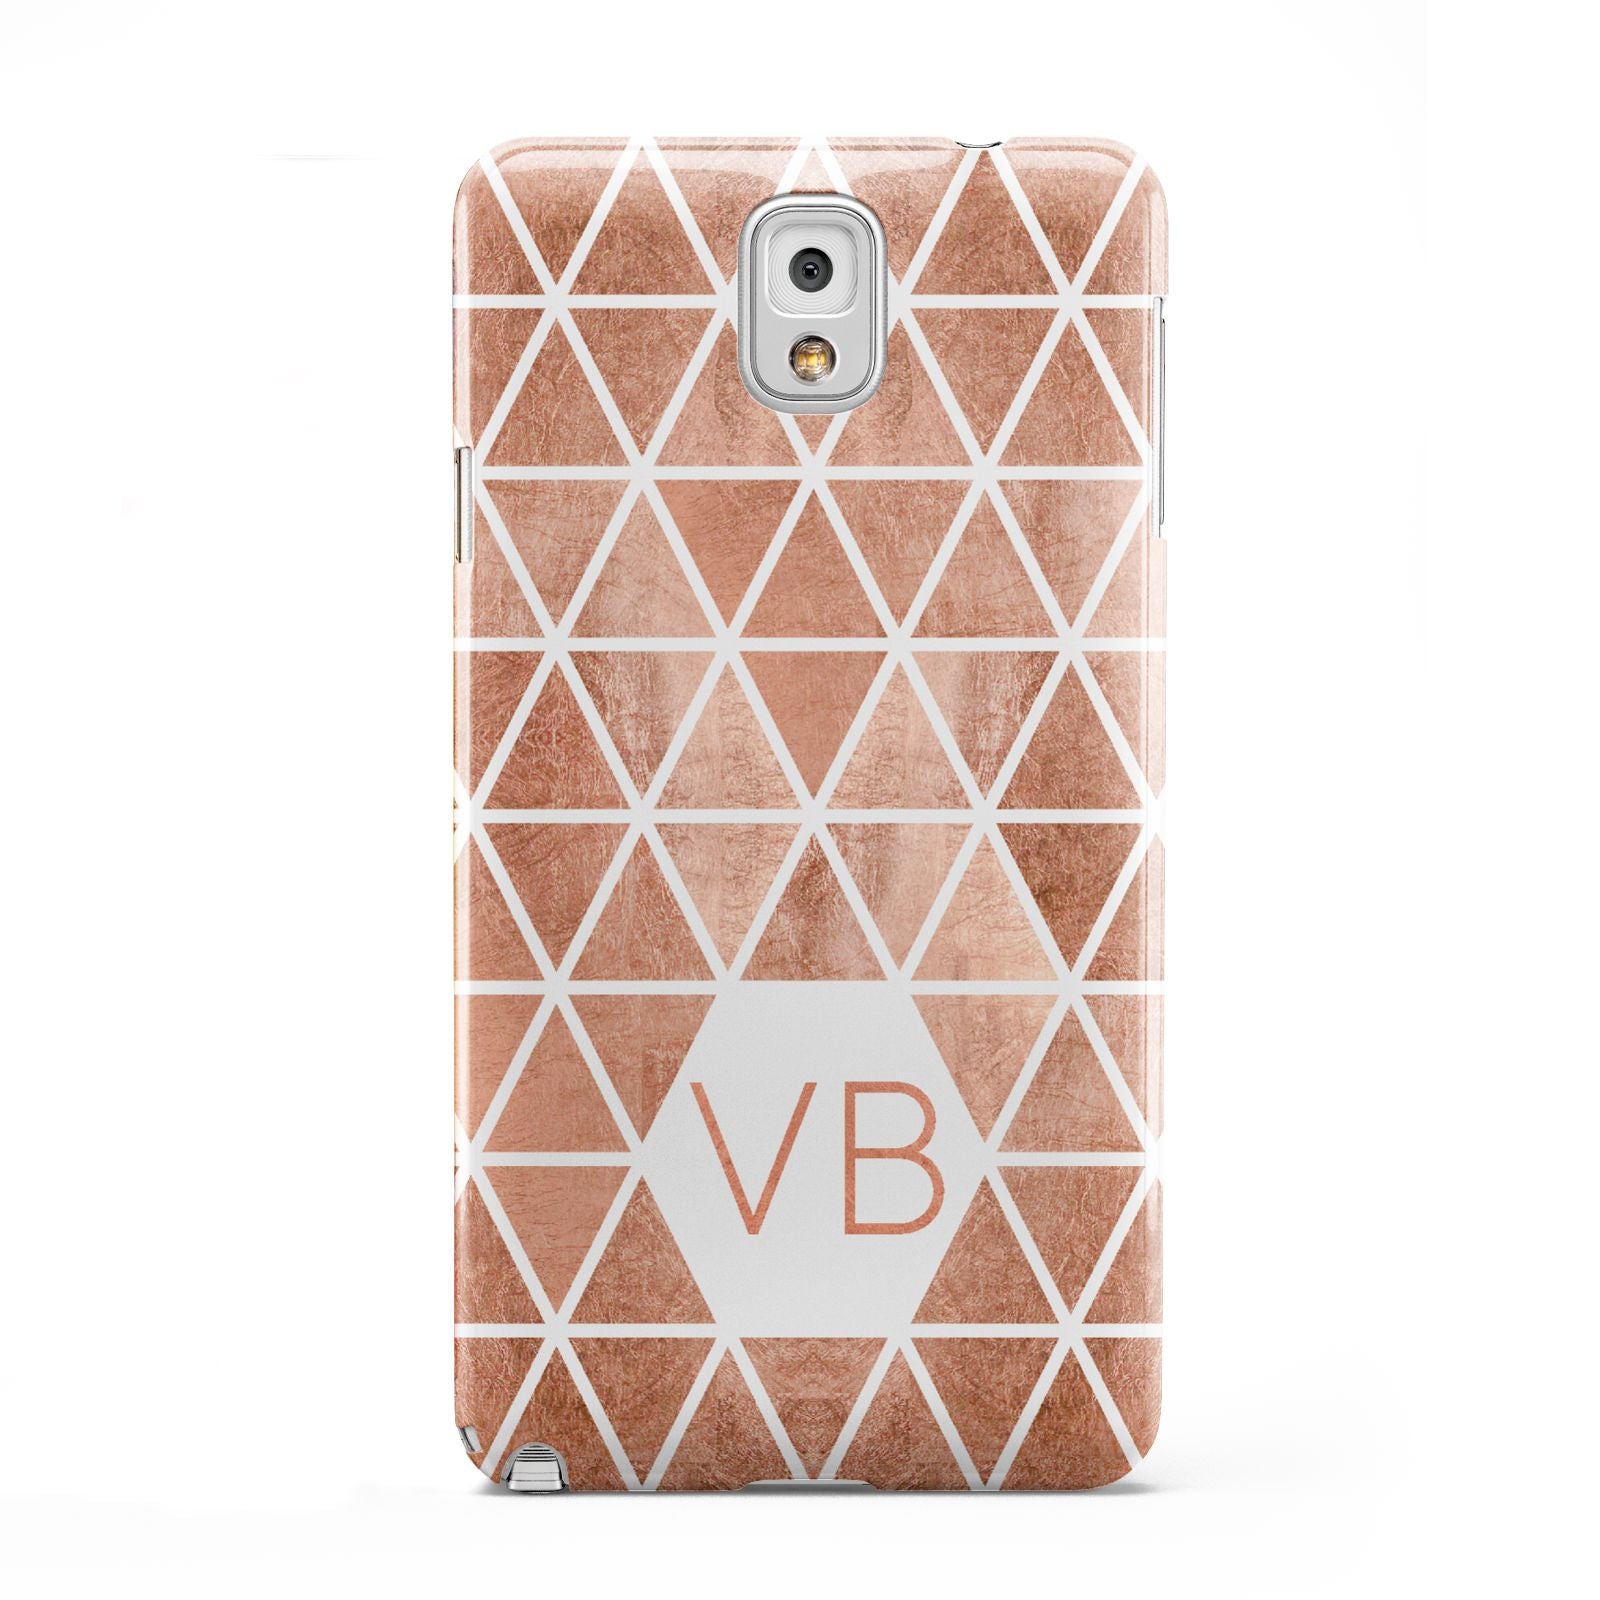 Personalised Copper Initials Samsung Galaxy Note 3 Case